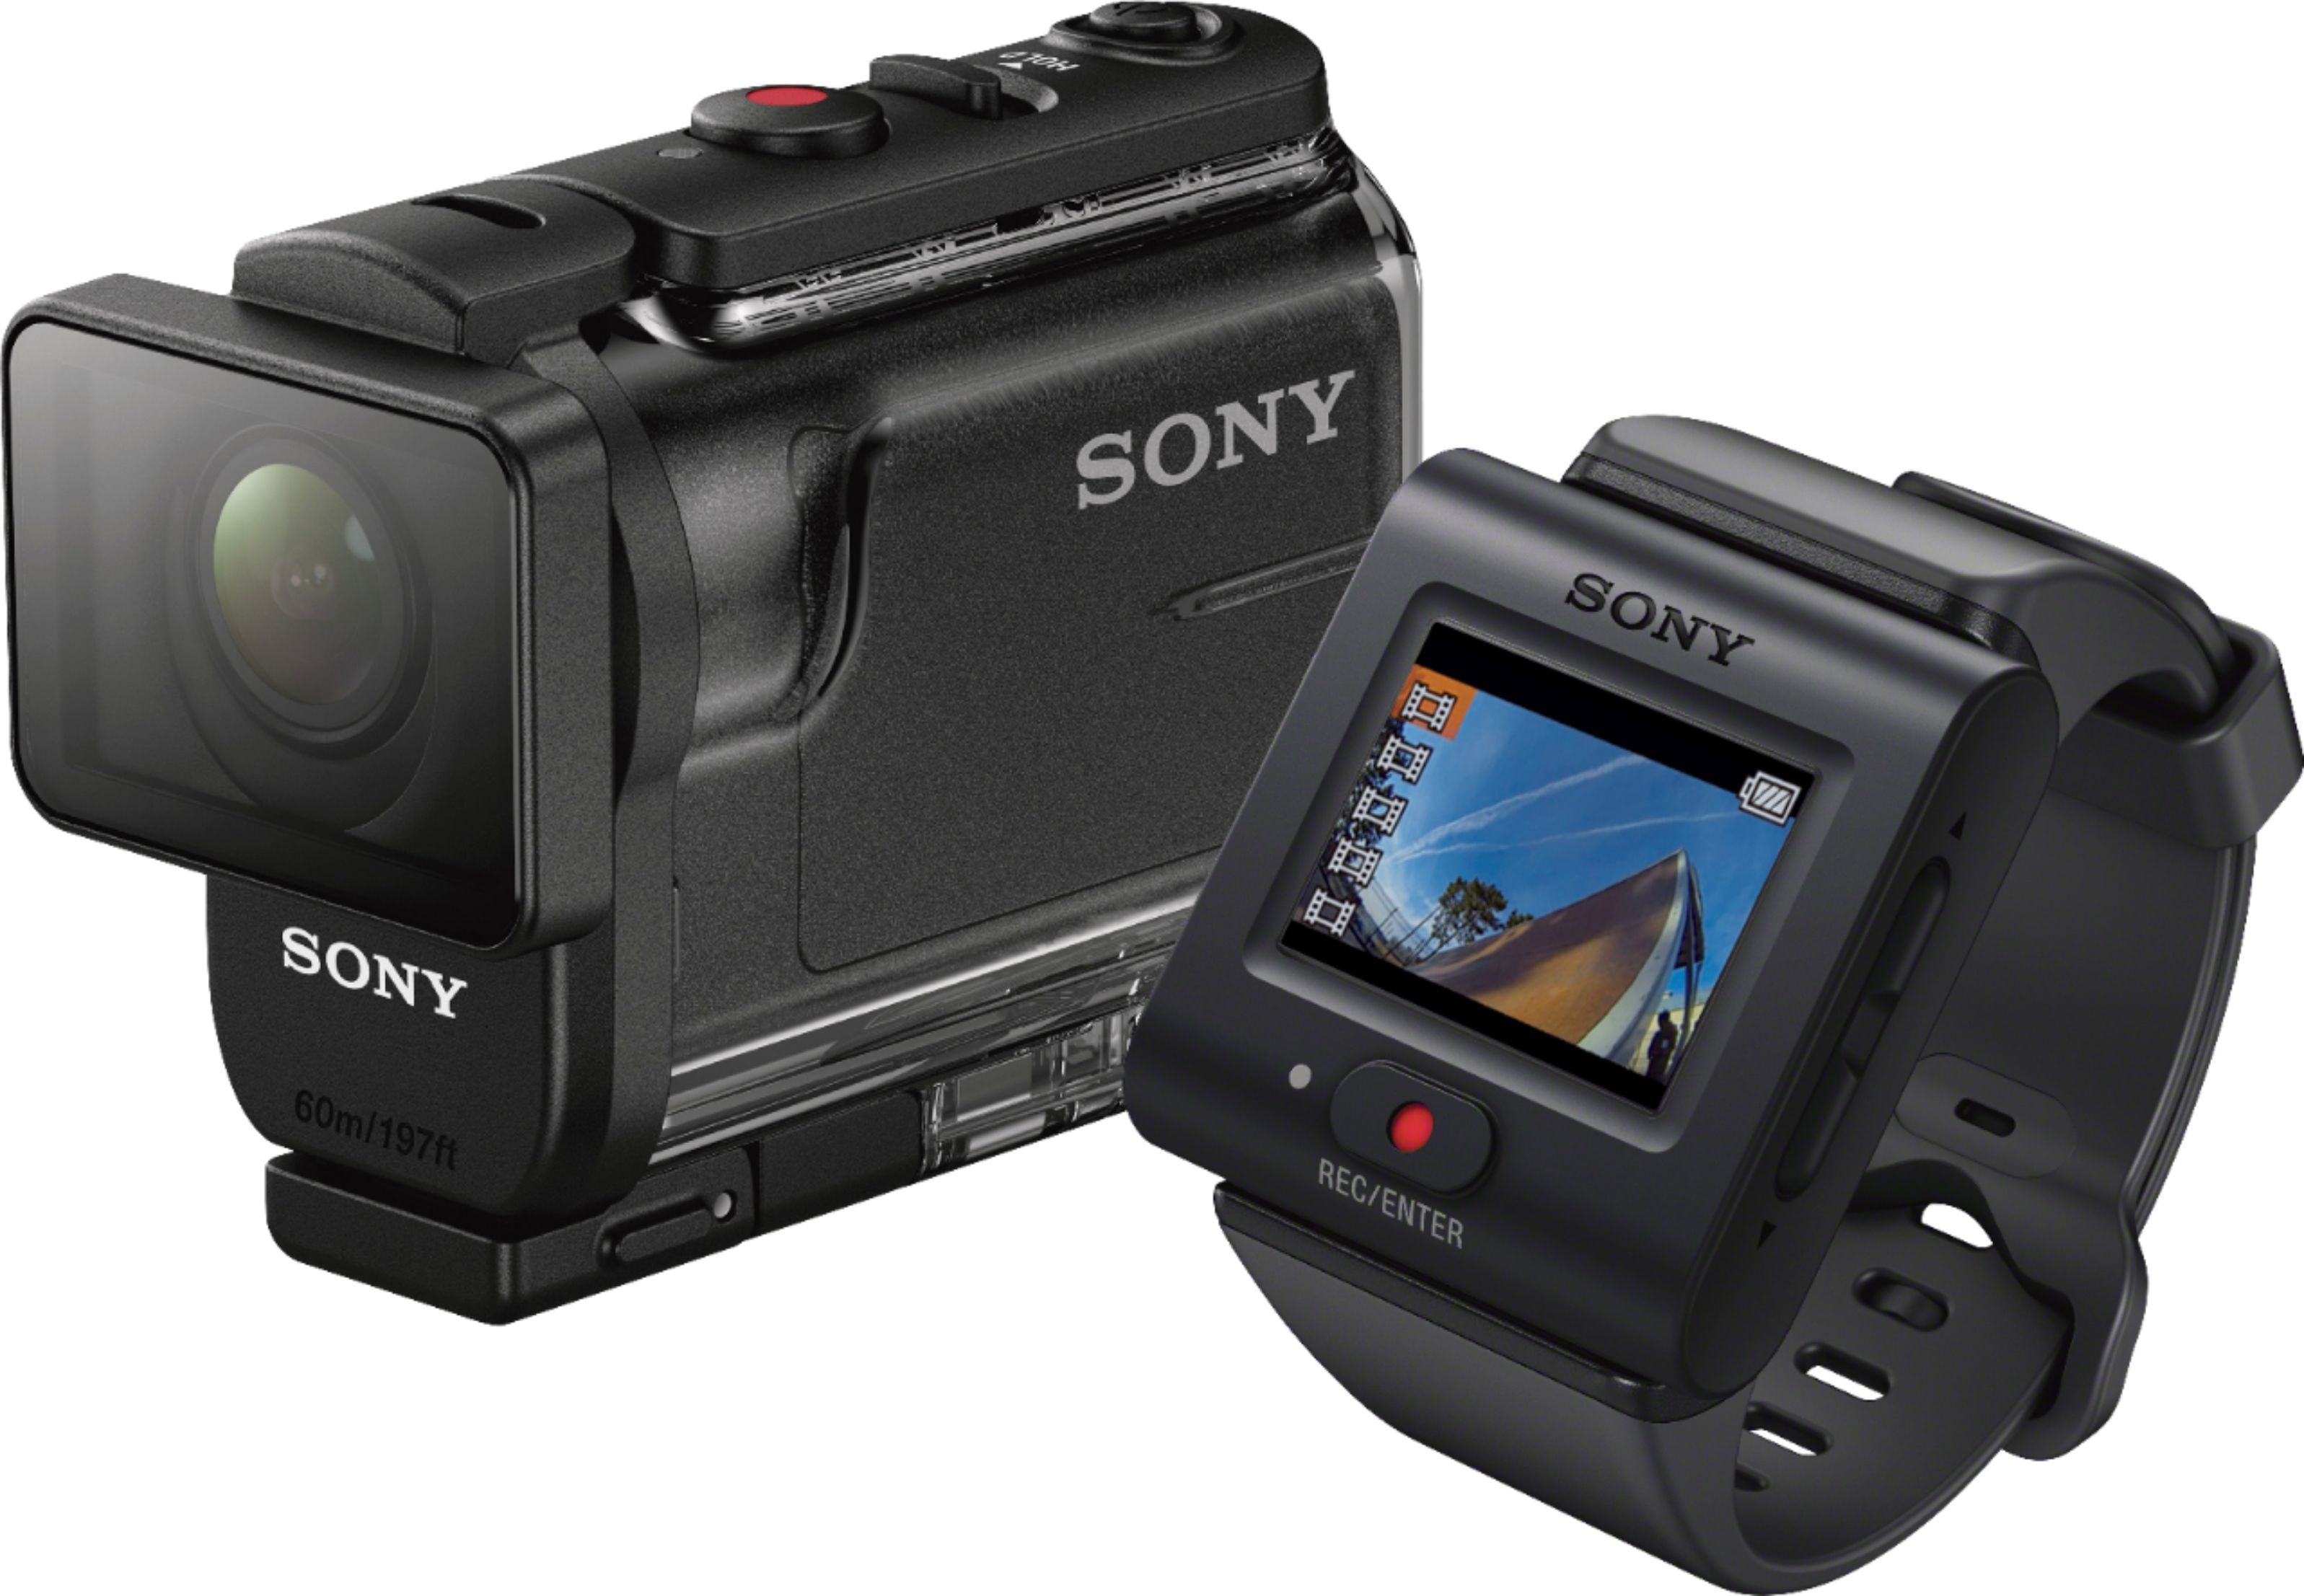 Best Buy: Sony HDR-AS50 HD Action Camera with Live View Remote 